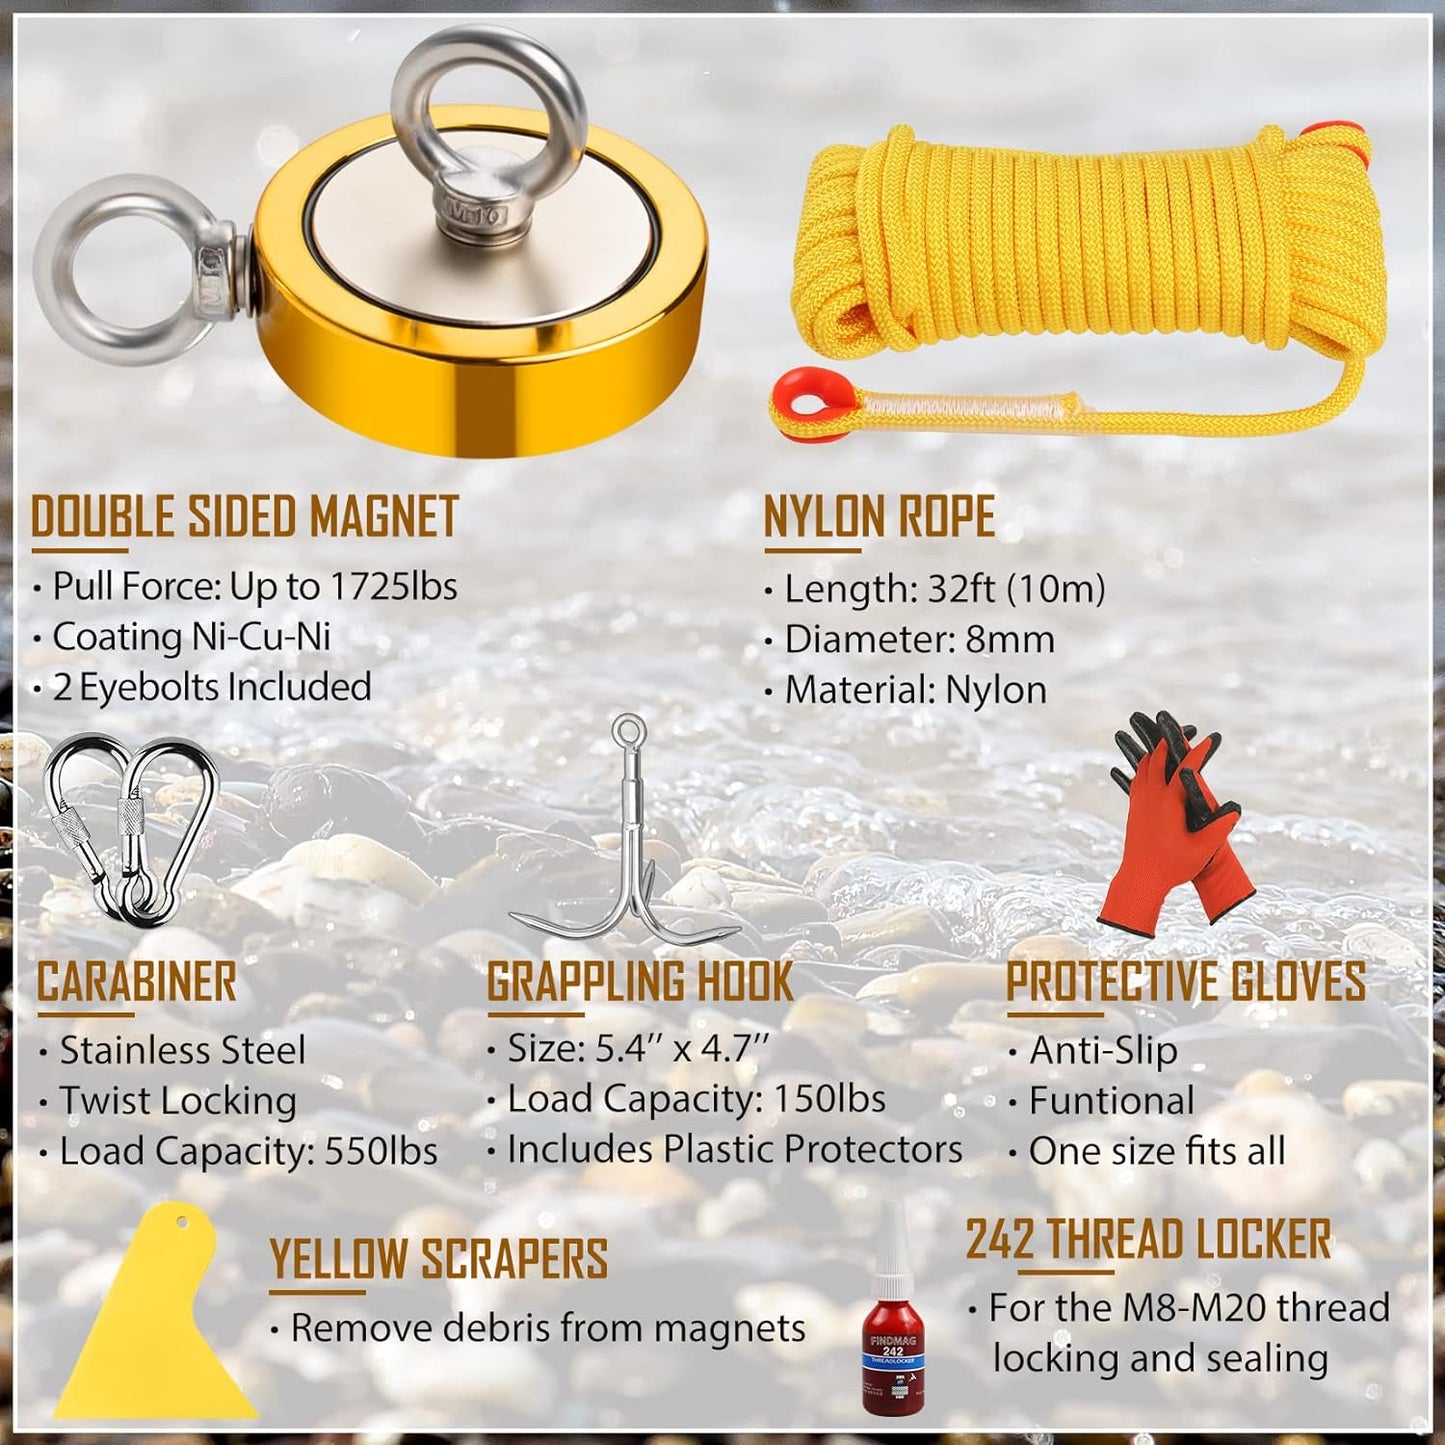 Magnets Fishing Kit Fishing Kit for Magnetic Fishing and Retrieving Items in River, Lake